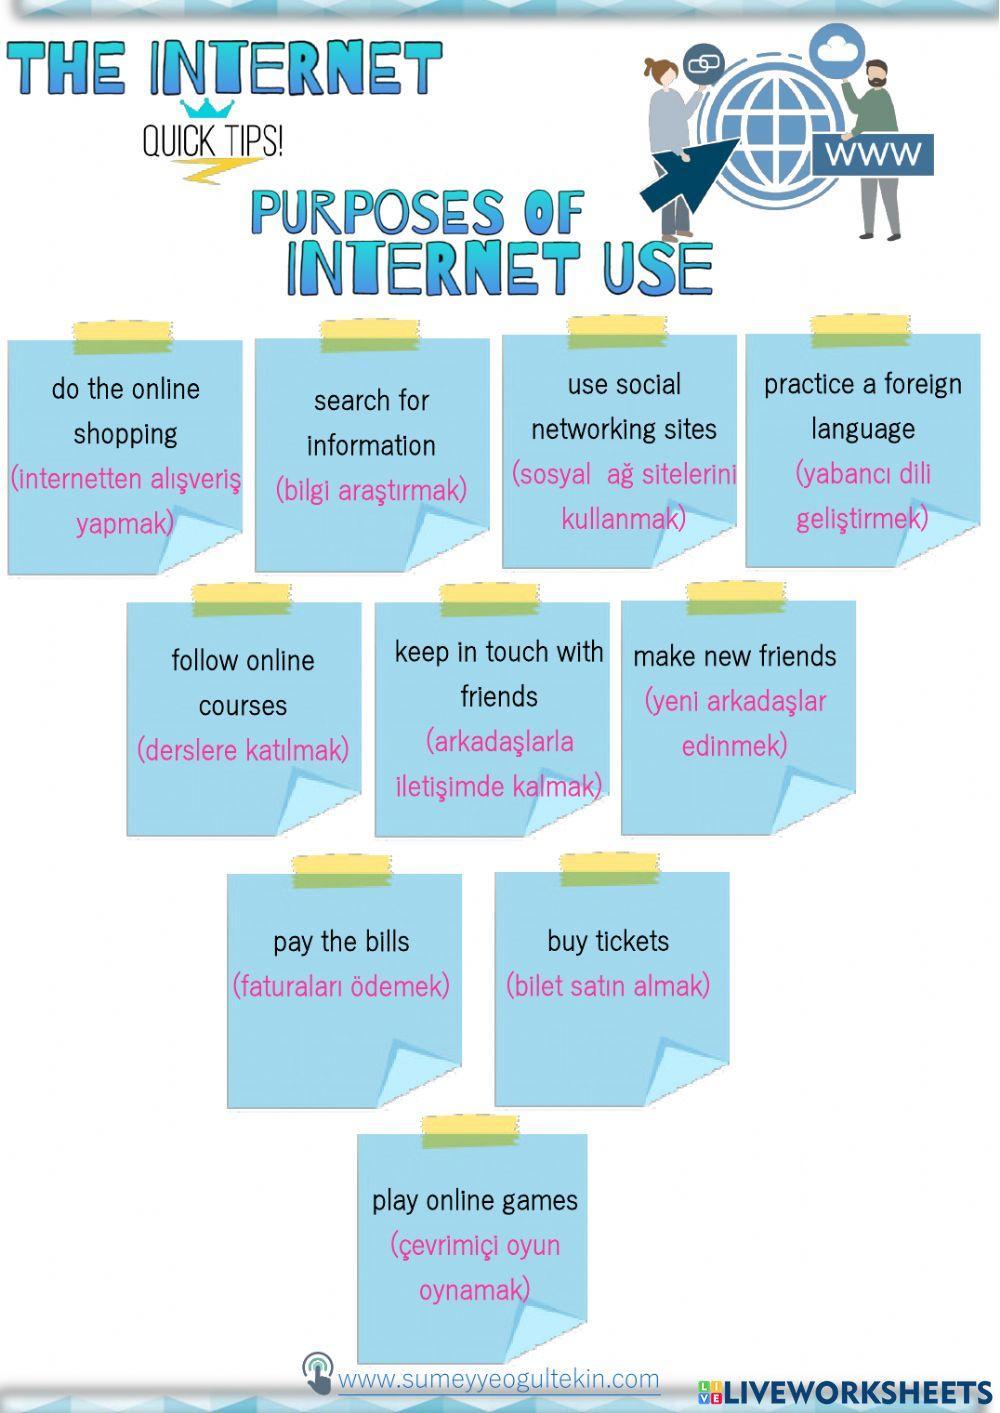 The Internet - Quick tips (Vocabulary)